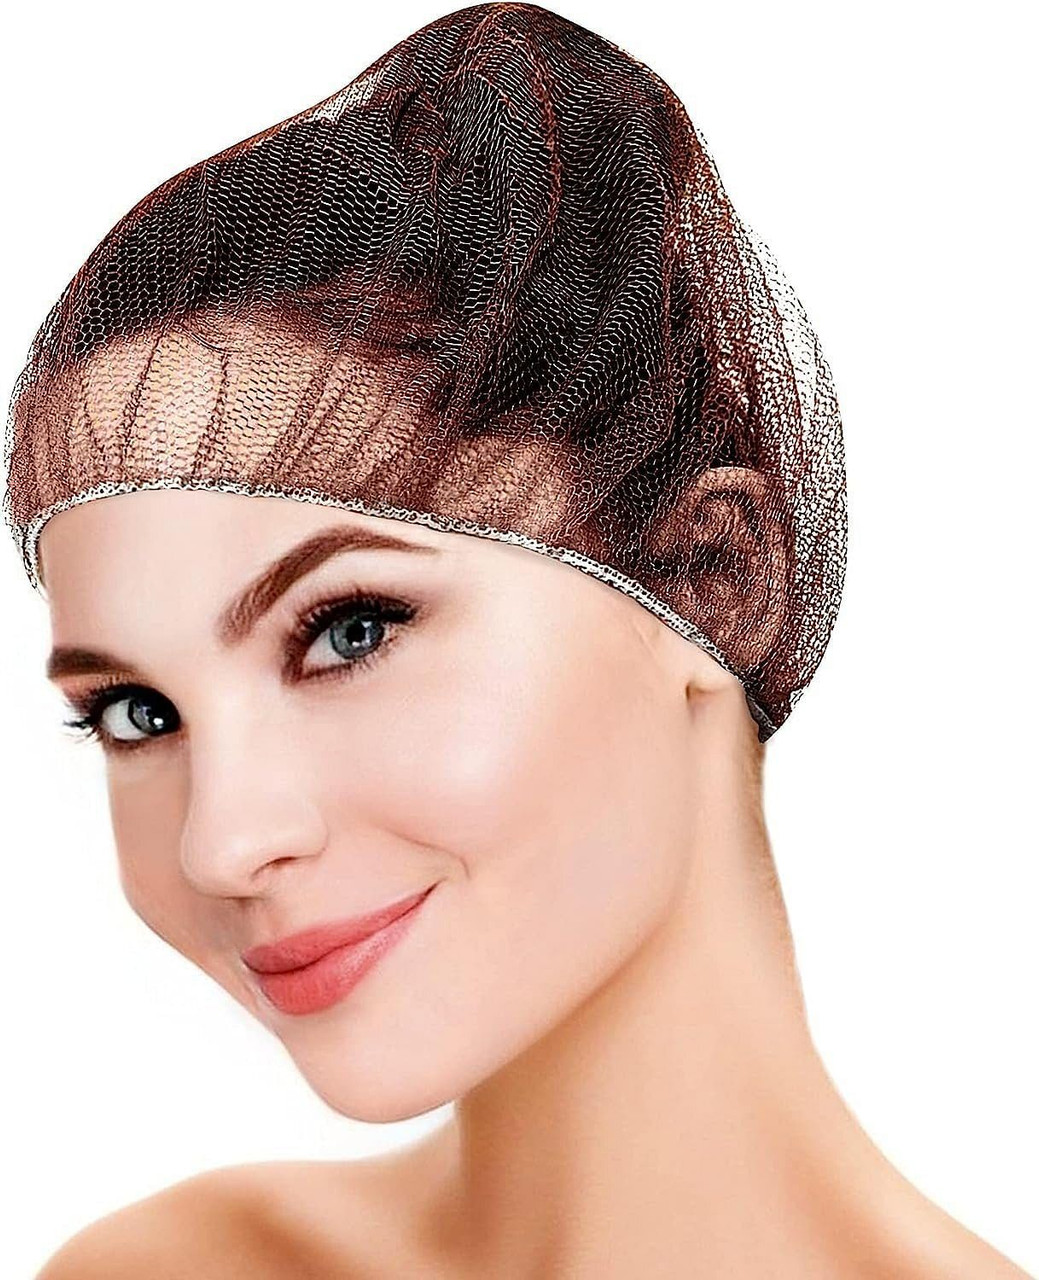 Disposable Hair Net 21 Inch. Pack of 1000 Brown Nylon Bouffant Hair Nets Food Service. Soft Durable